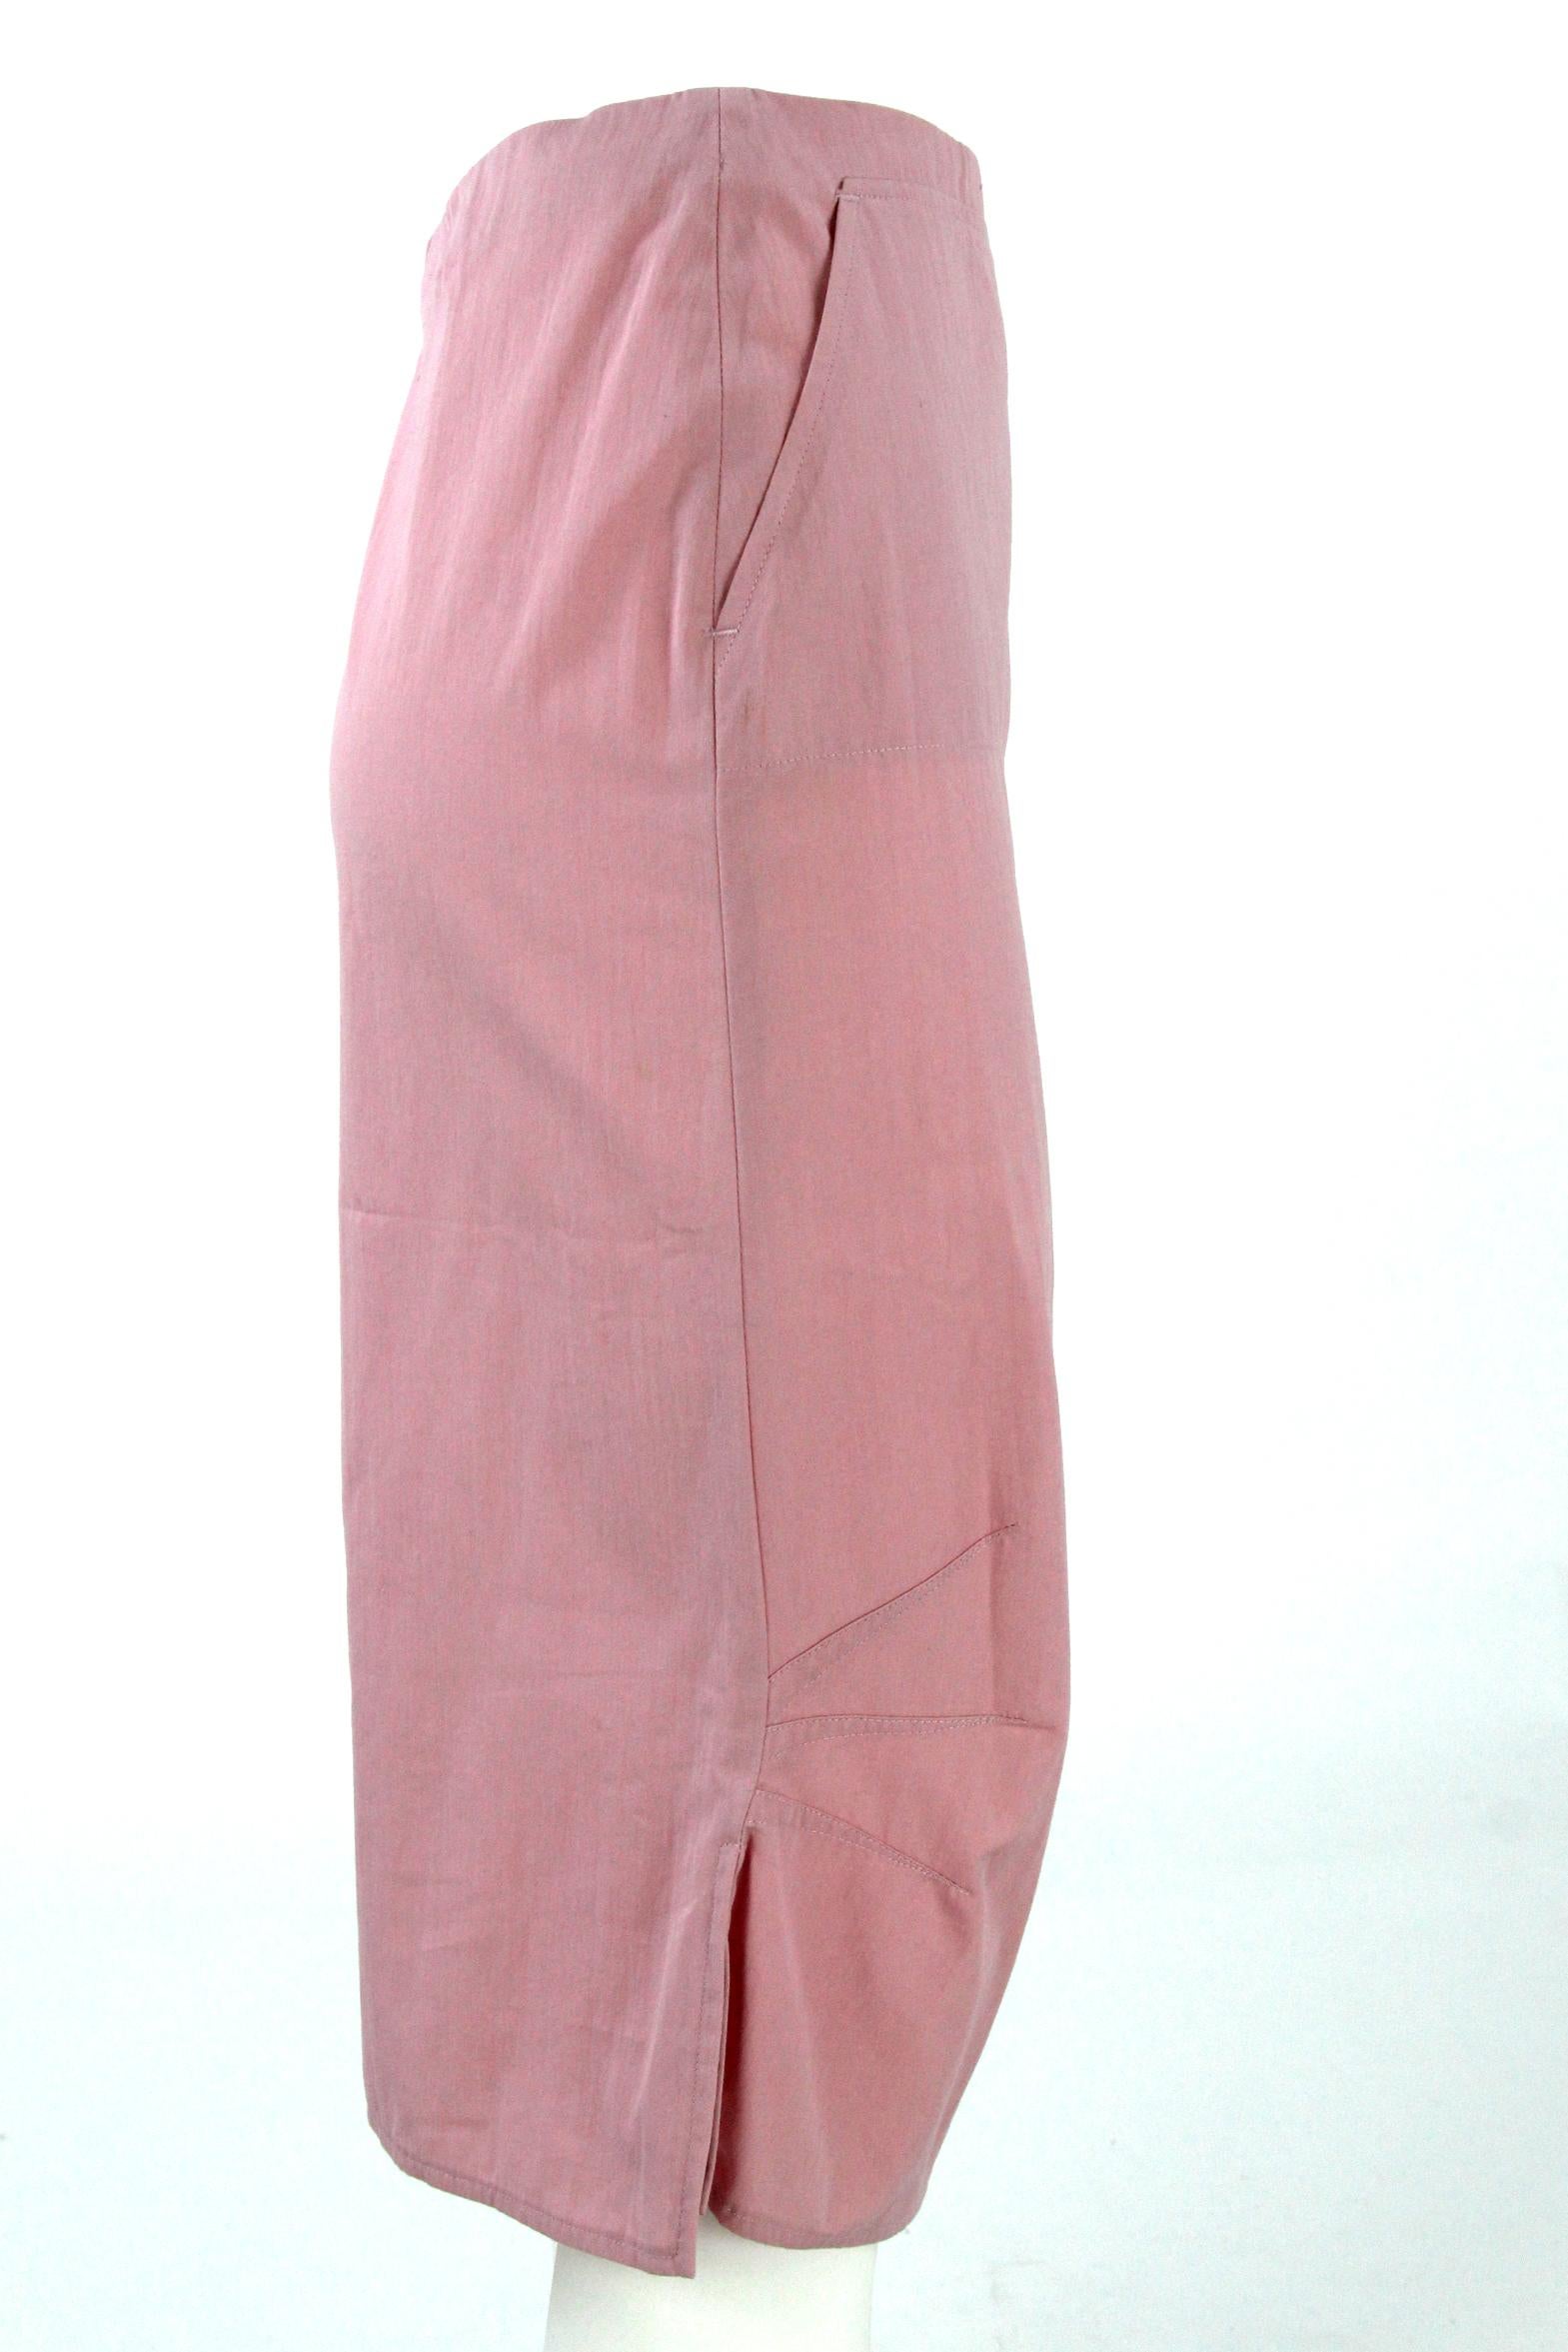 Versus pink cotton blend straight skirt. High-waisted model, hem with side slits and decorative modeling pleats on the knee, zip and hook closure on the back.

Size: 40 IT

Flat measurements
Height: 68 cm
Waist: 35 cm
Hips: 44 cm

Product code: